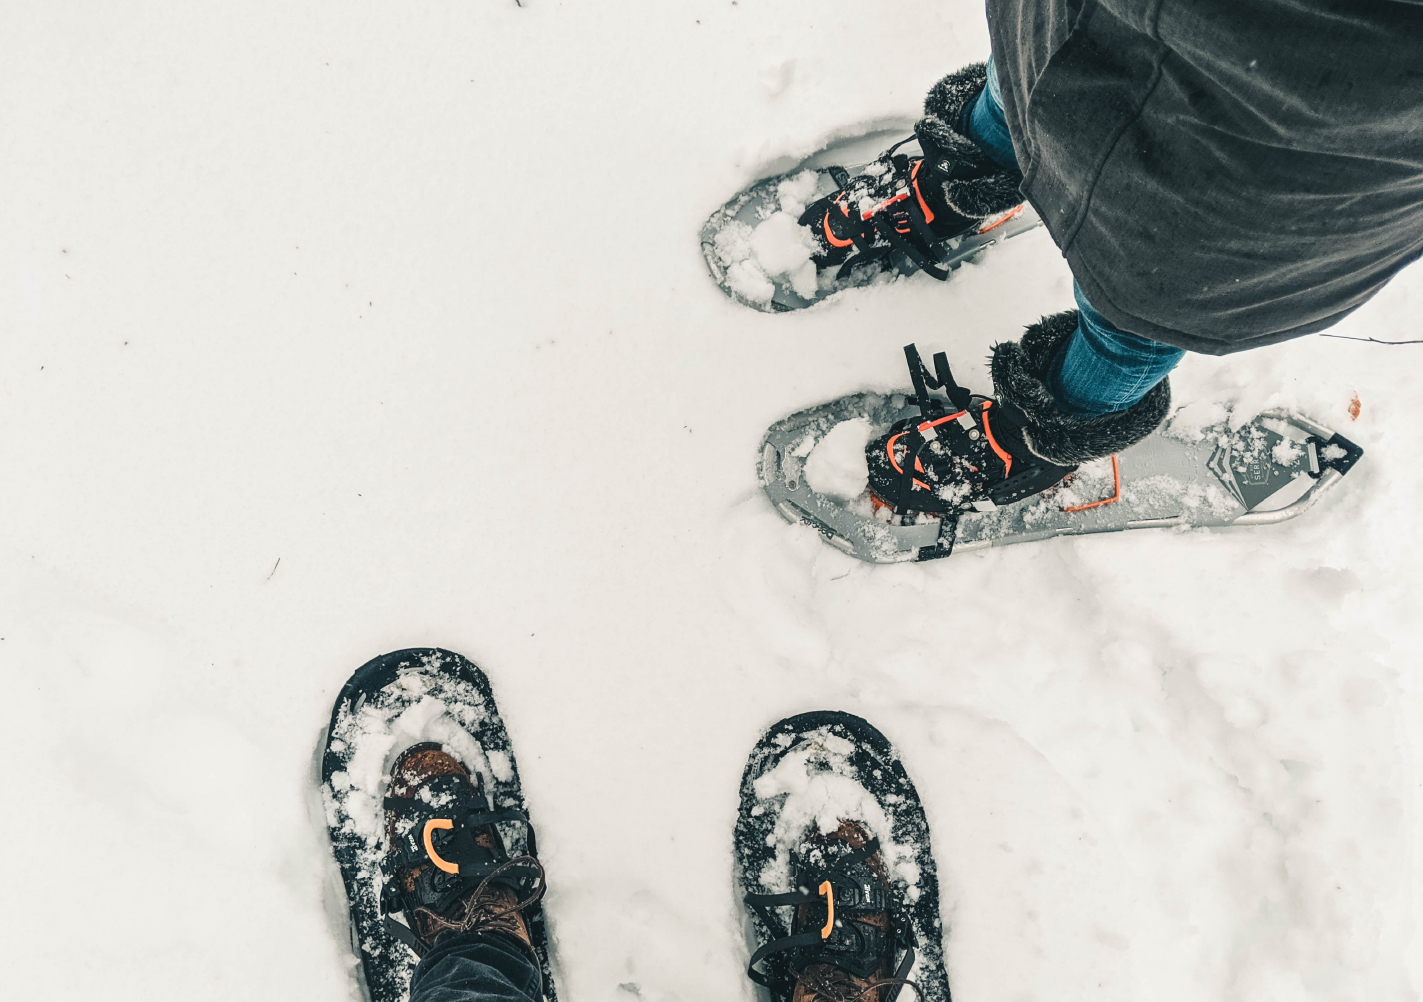 Two people wearing snowshoes.